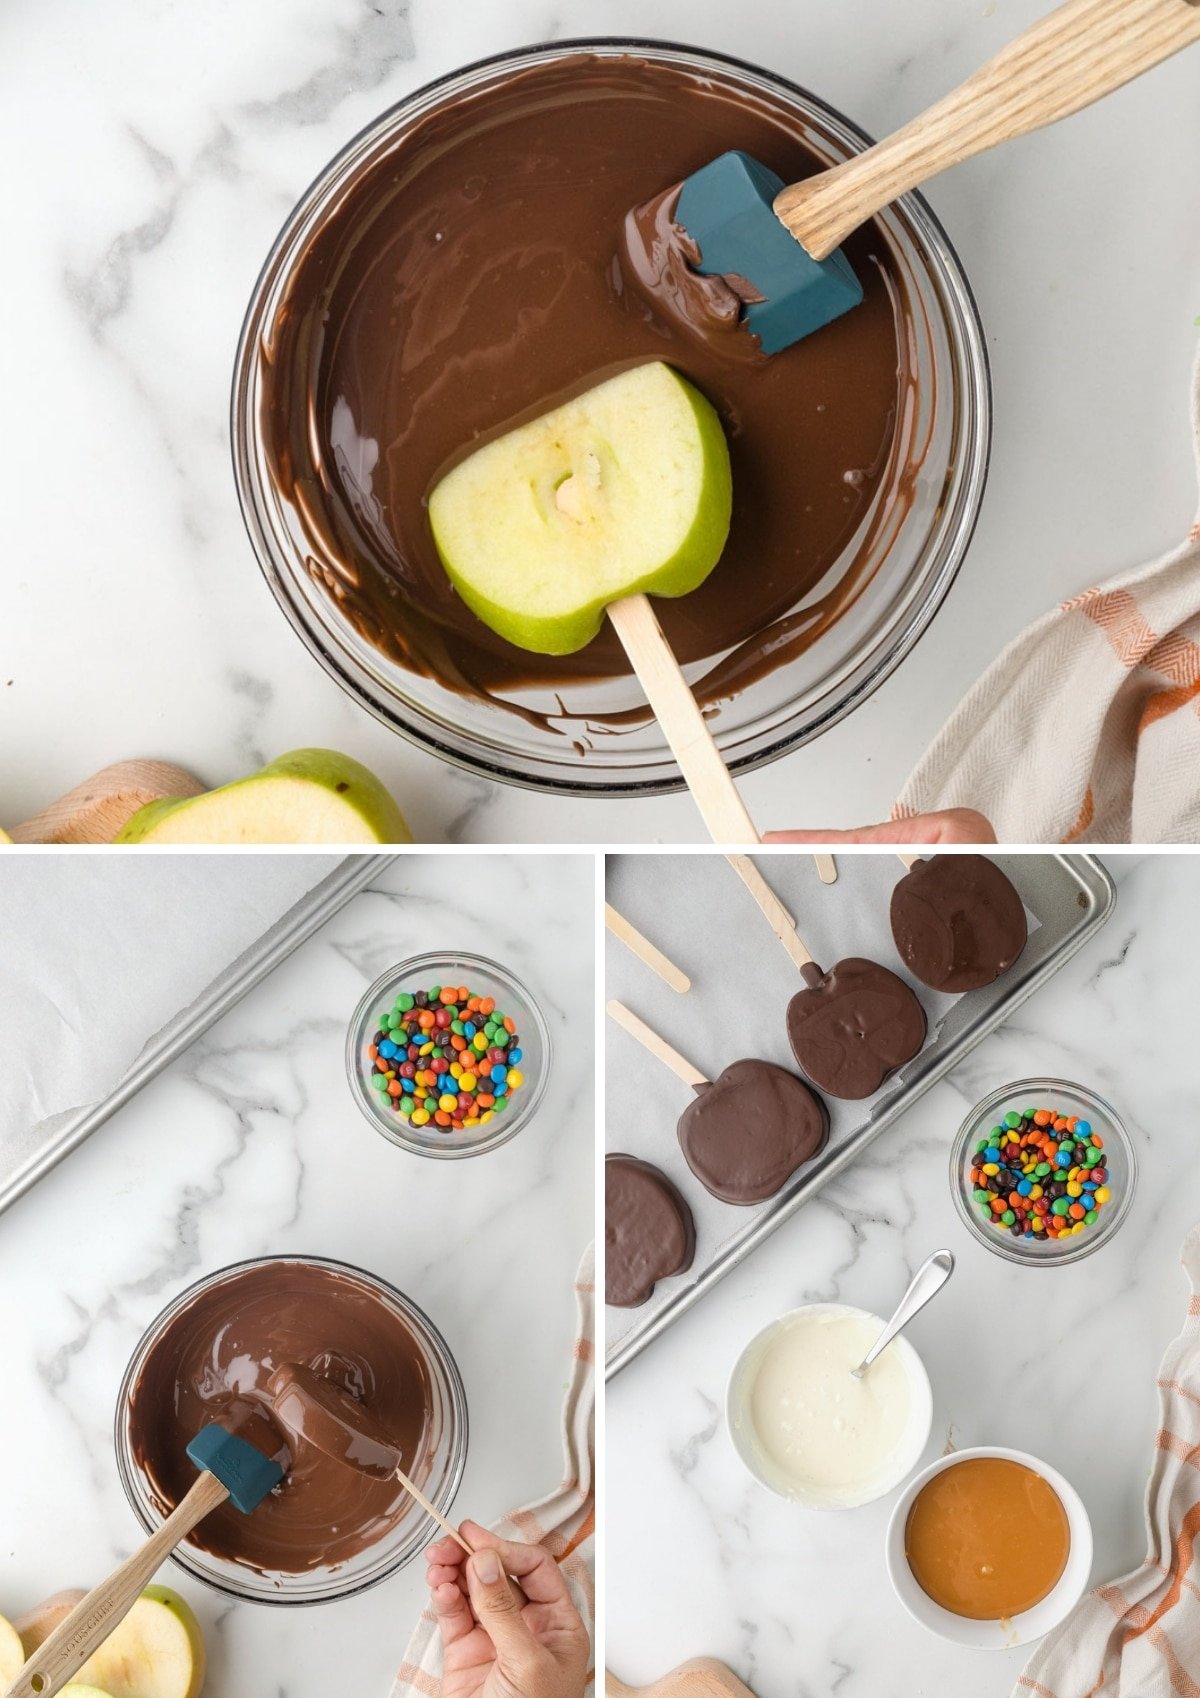 three photos showing the process of dipping apple slices into melted chocolate